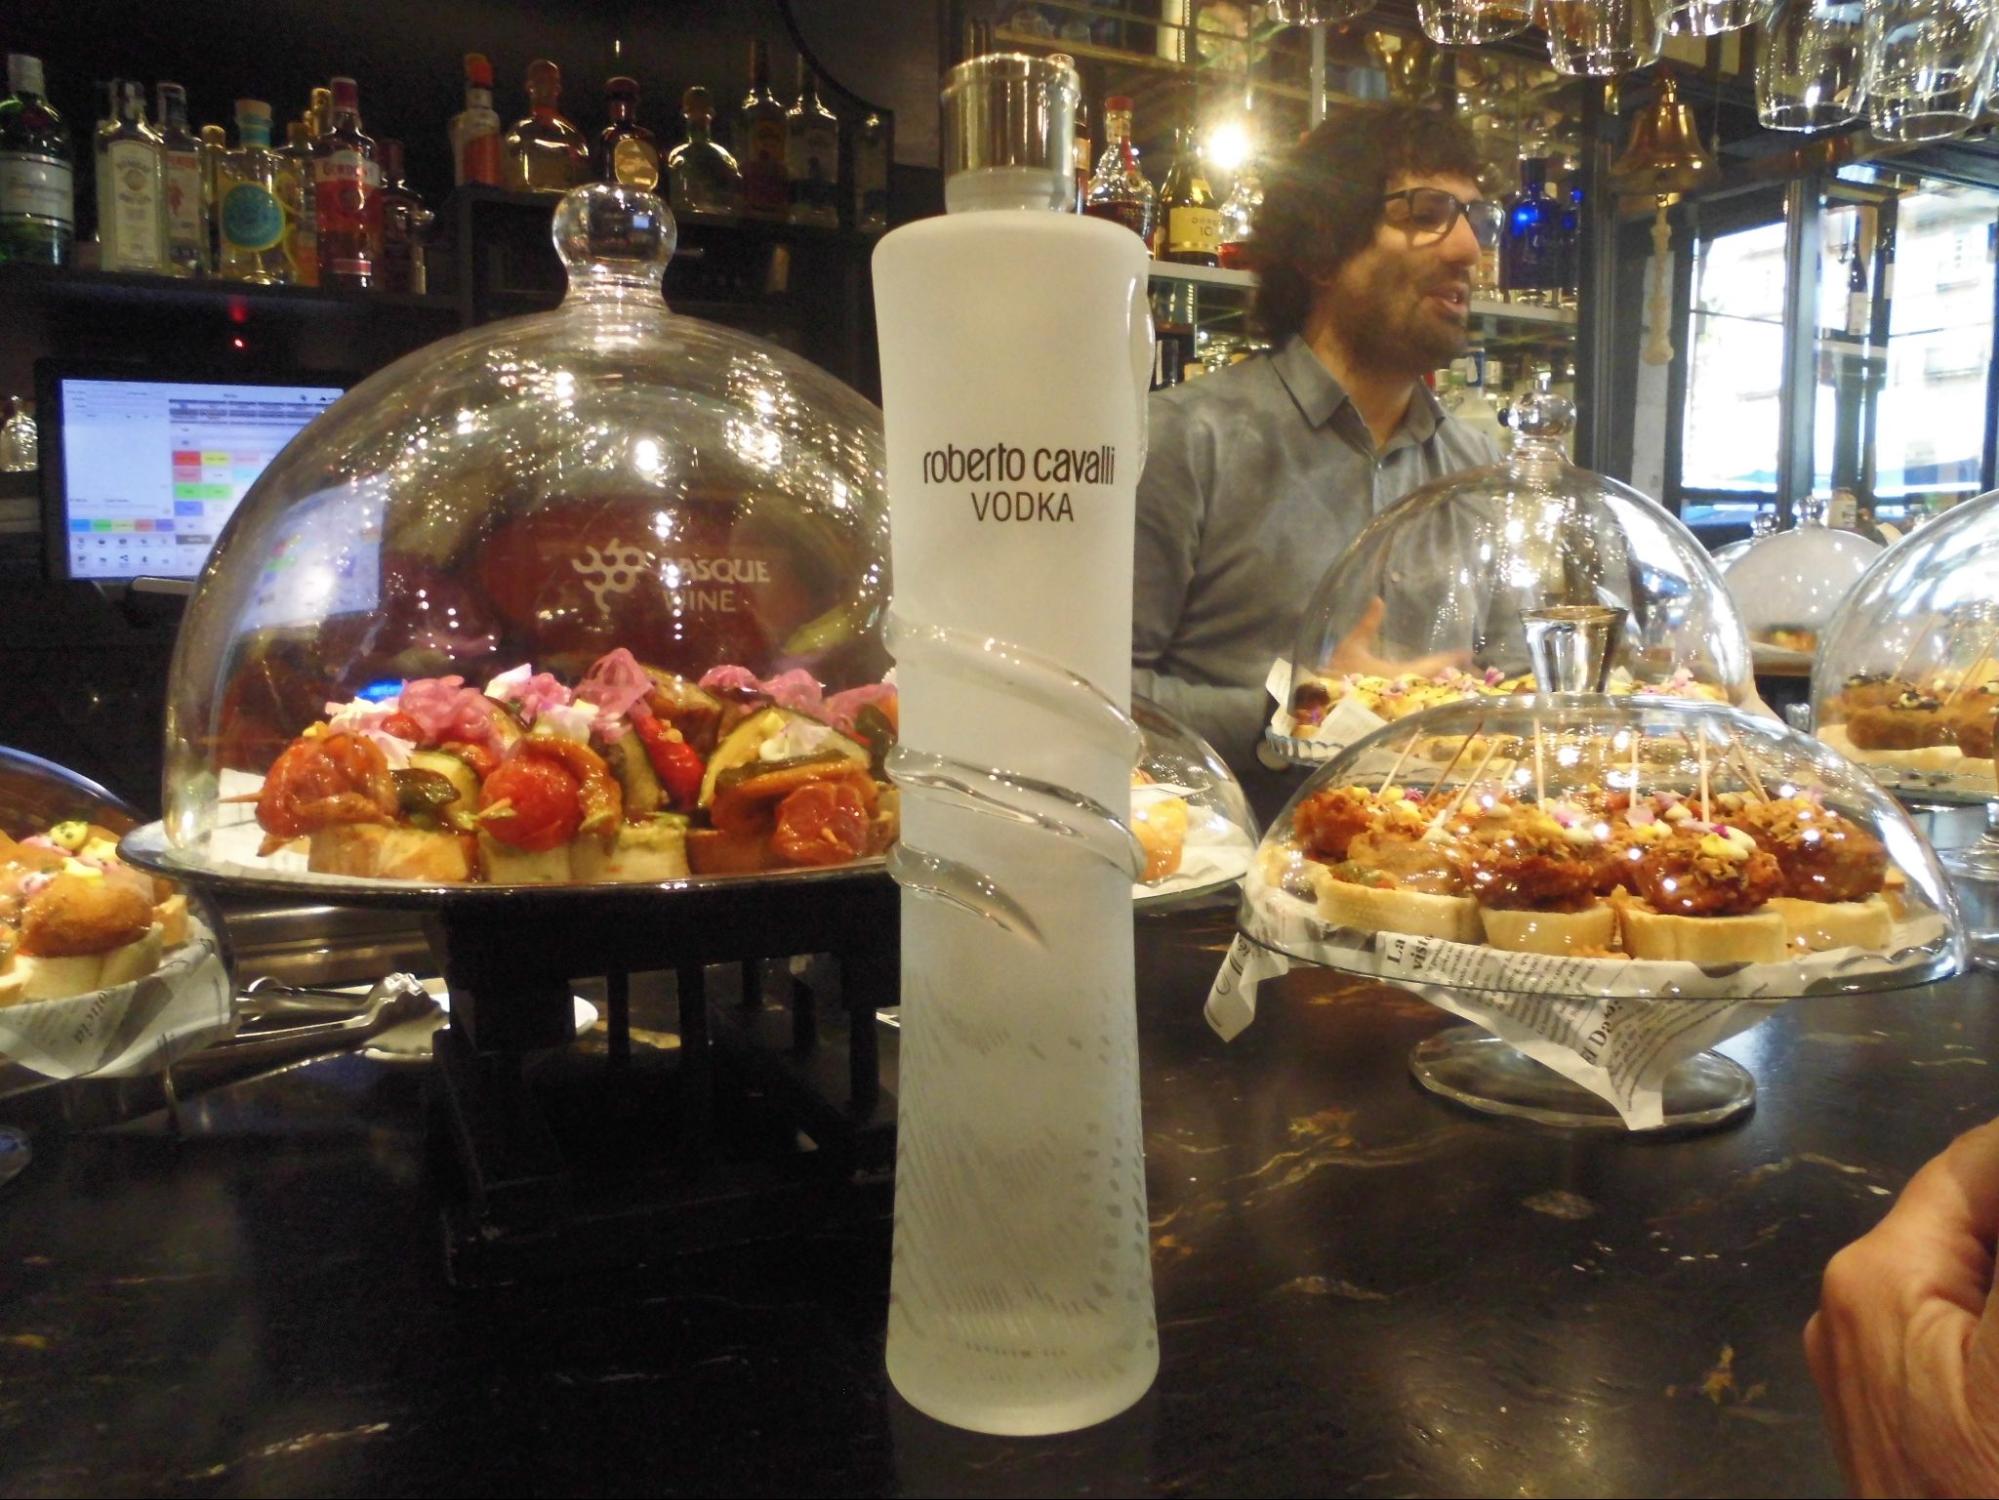 Vodka and tapas at a bar in Spain